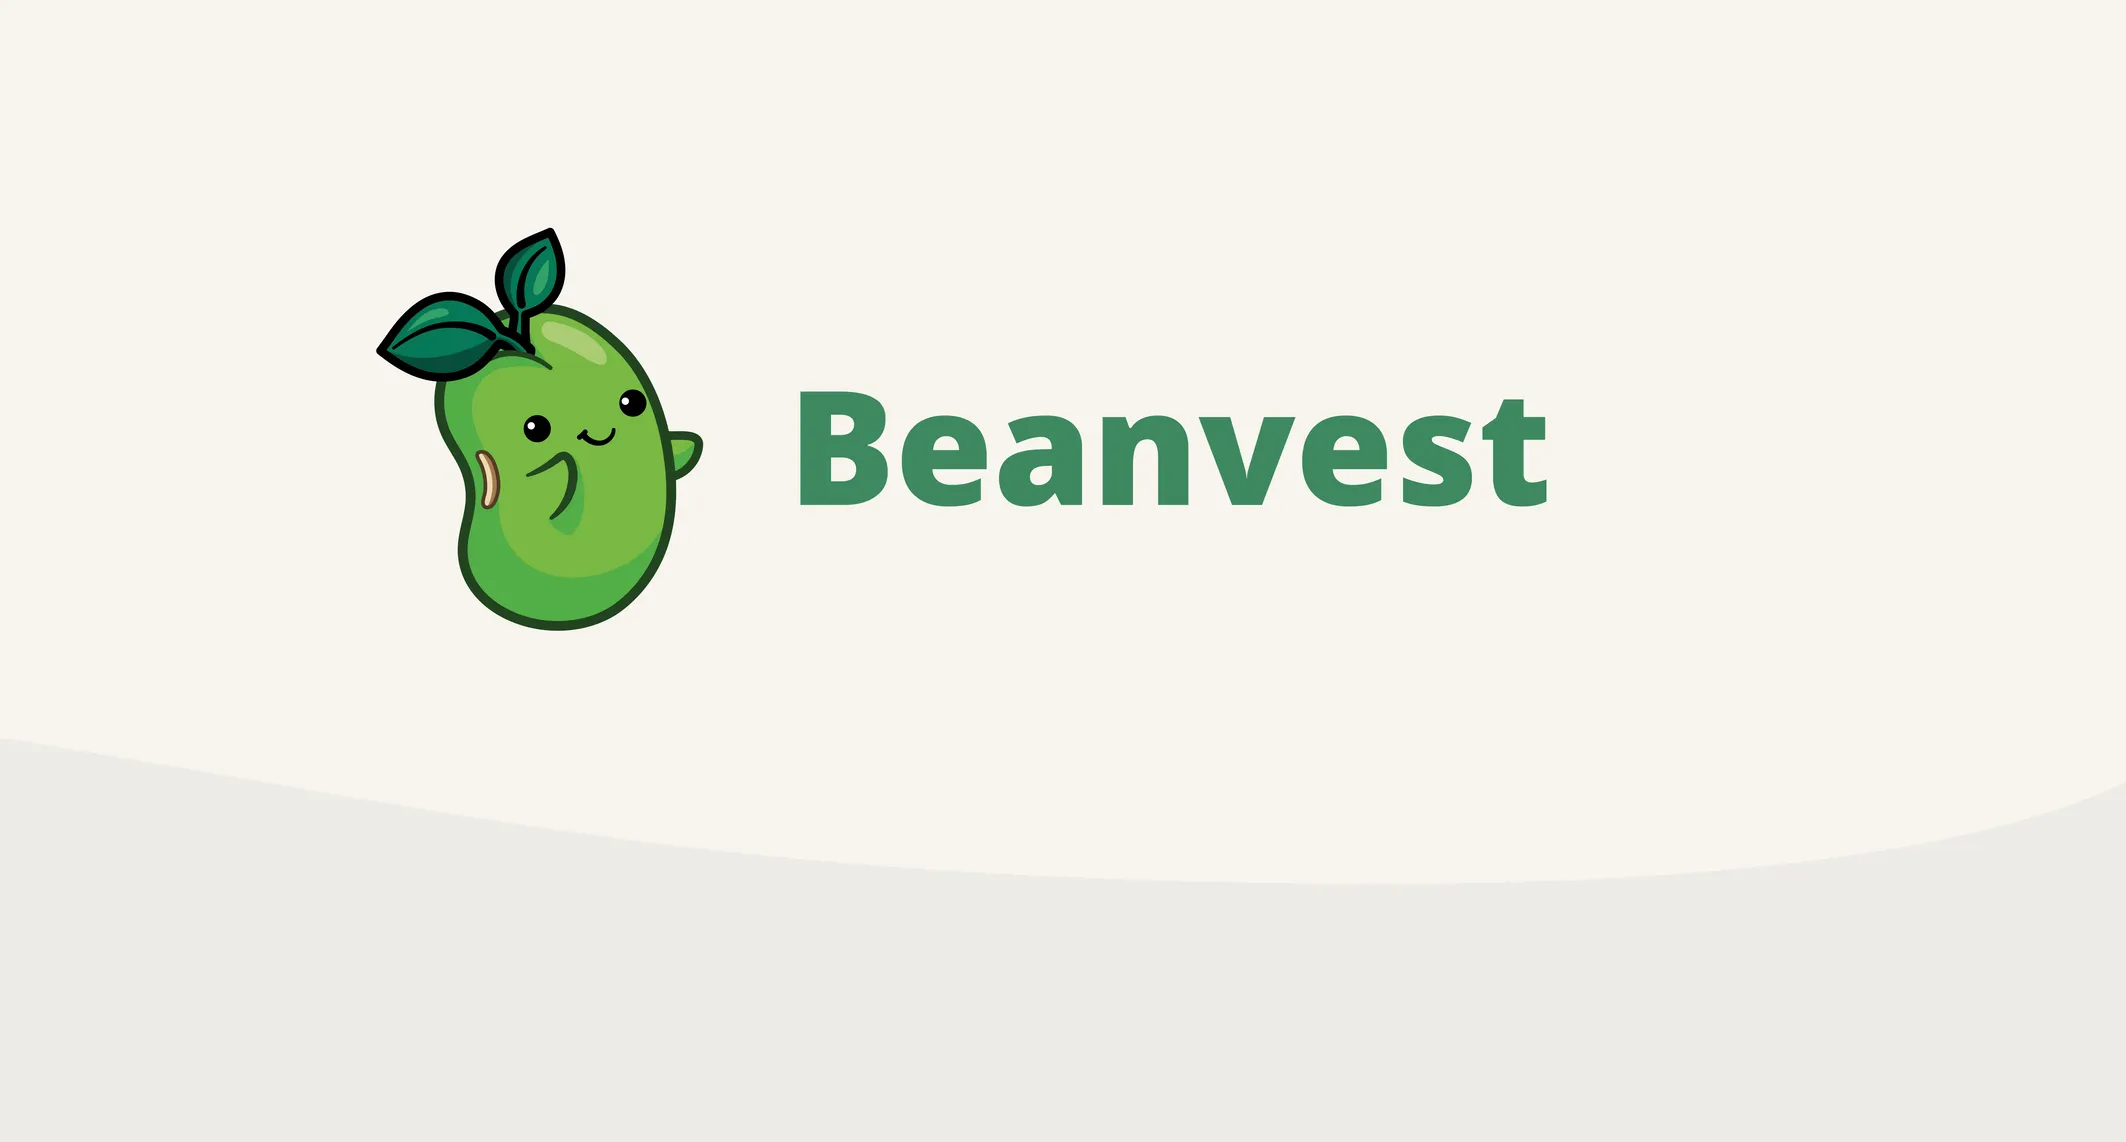 Welcome to Beanvest